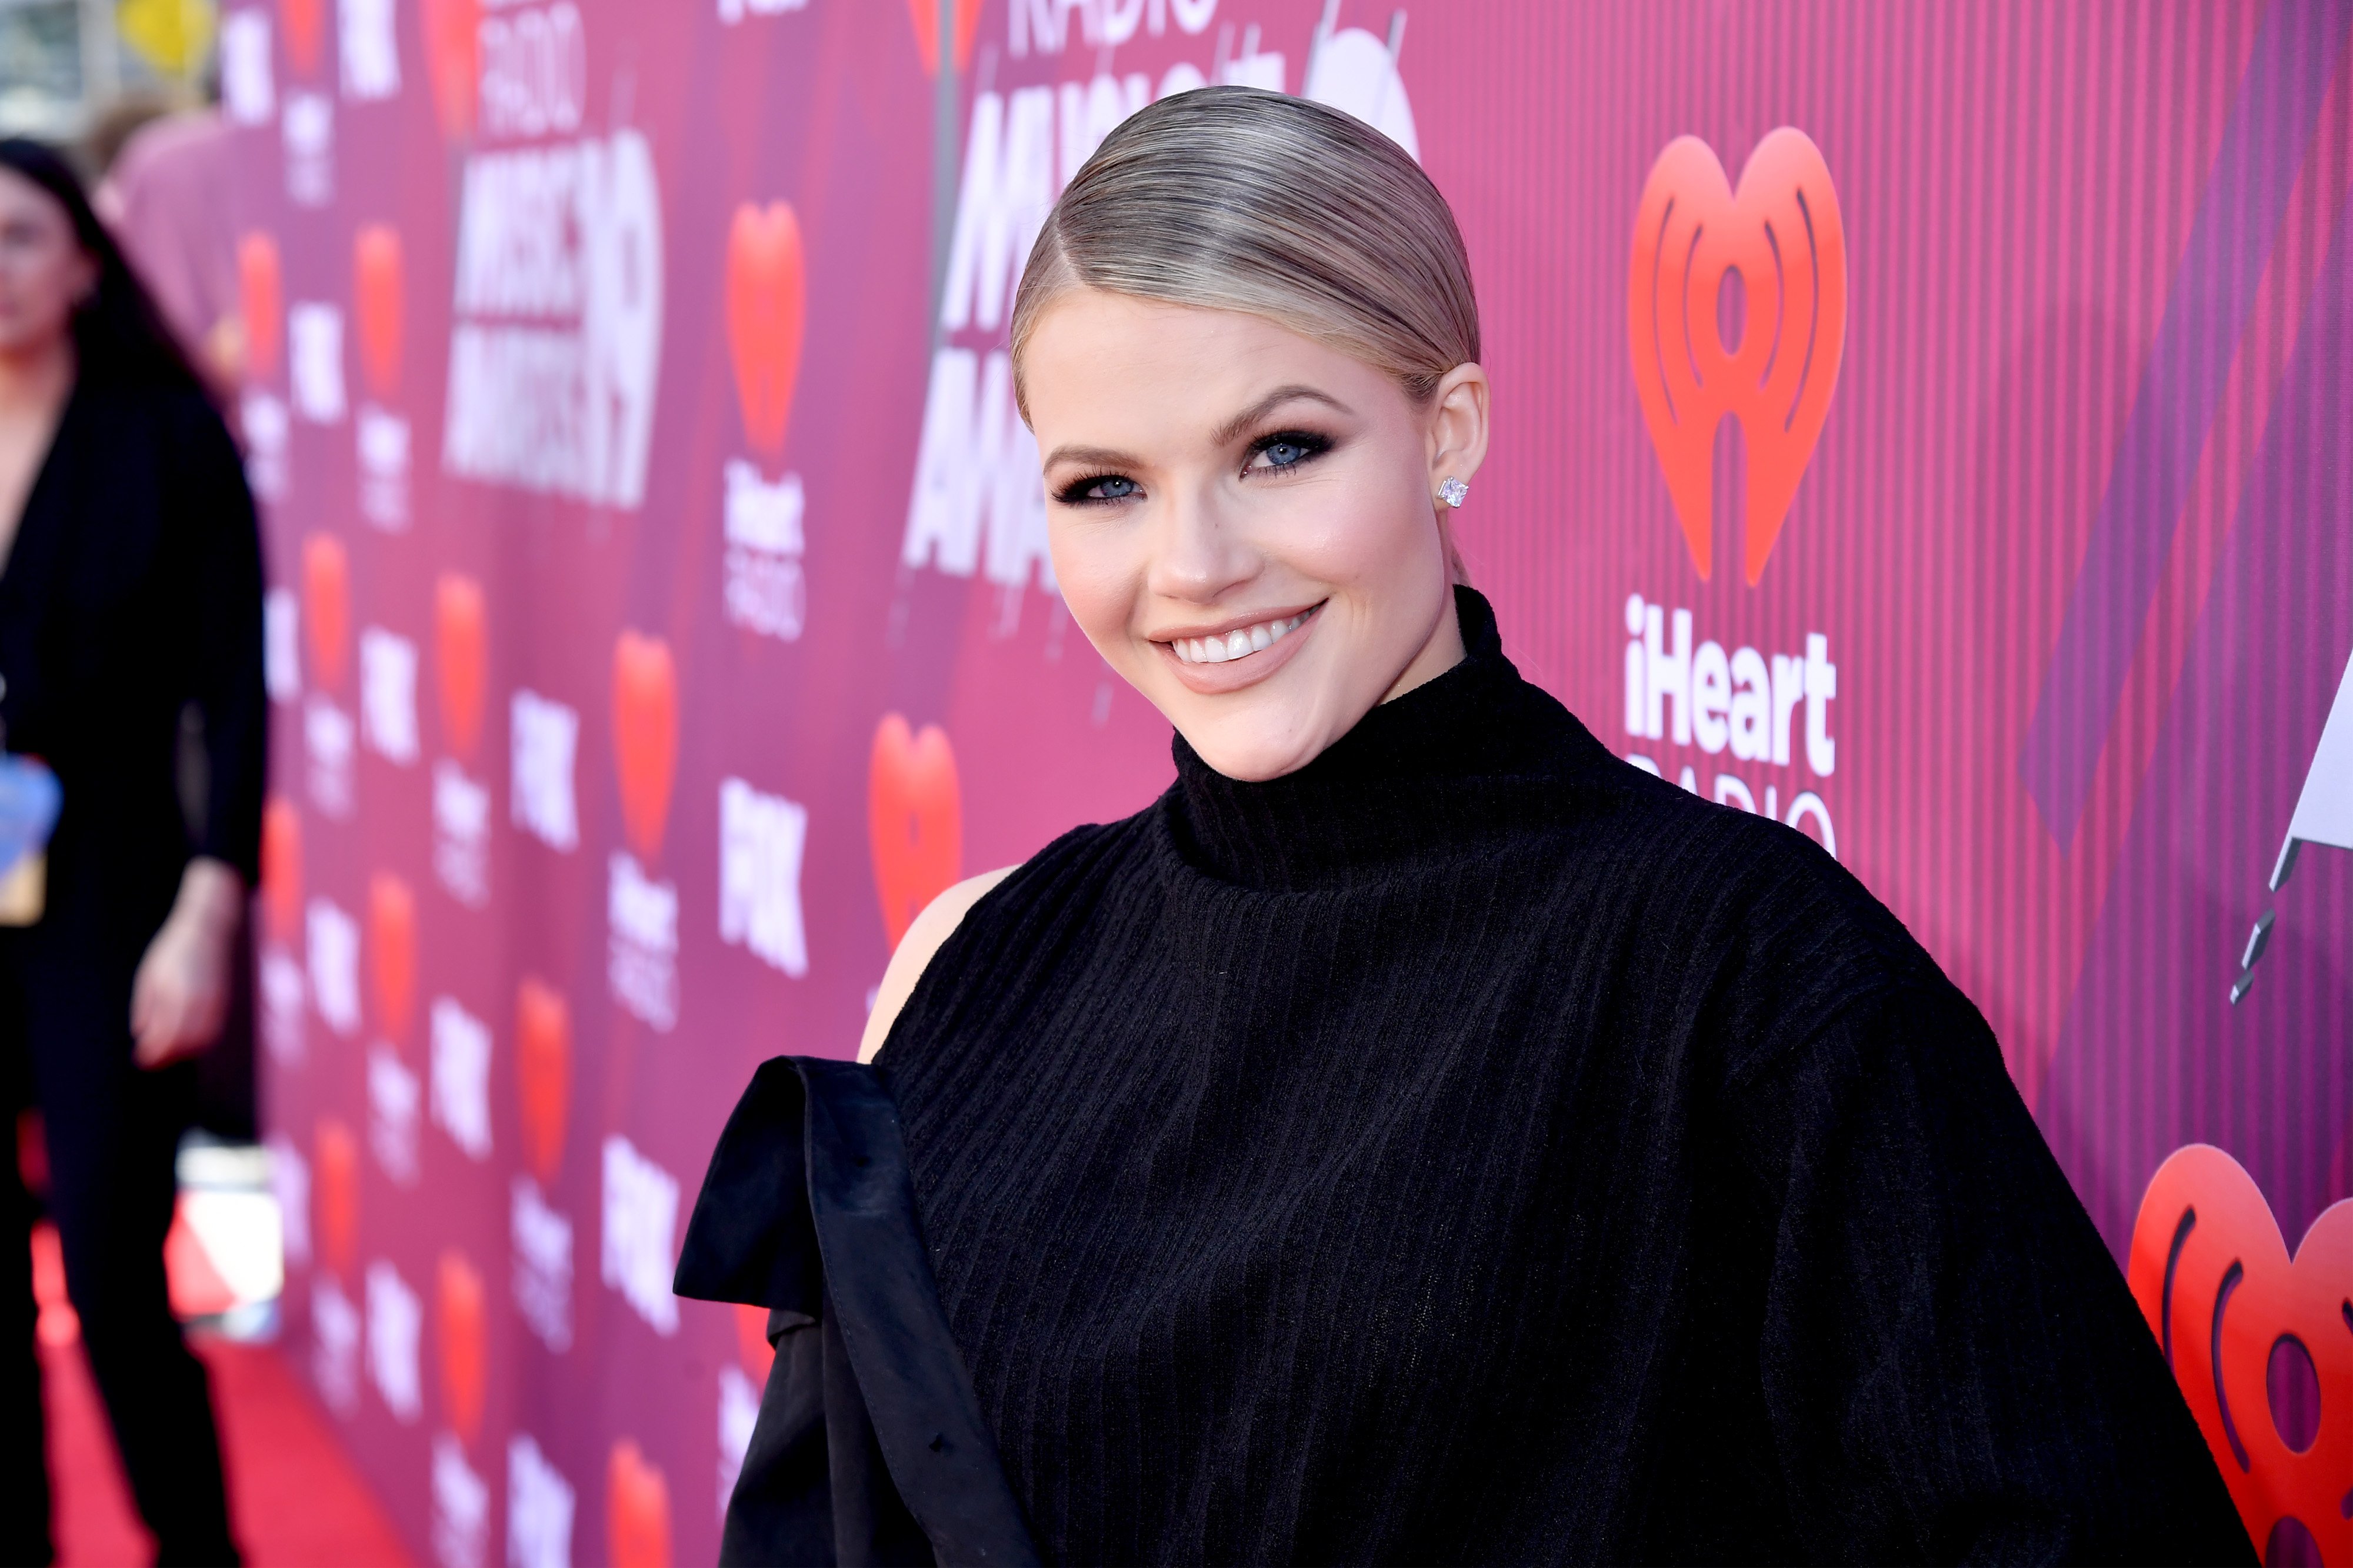 Witney Carson attends the iHeartRadio Music Awards on March 14, 2019, in Los Angeles, California. | Source: Getty Images.